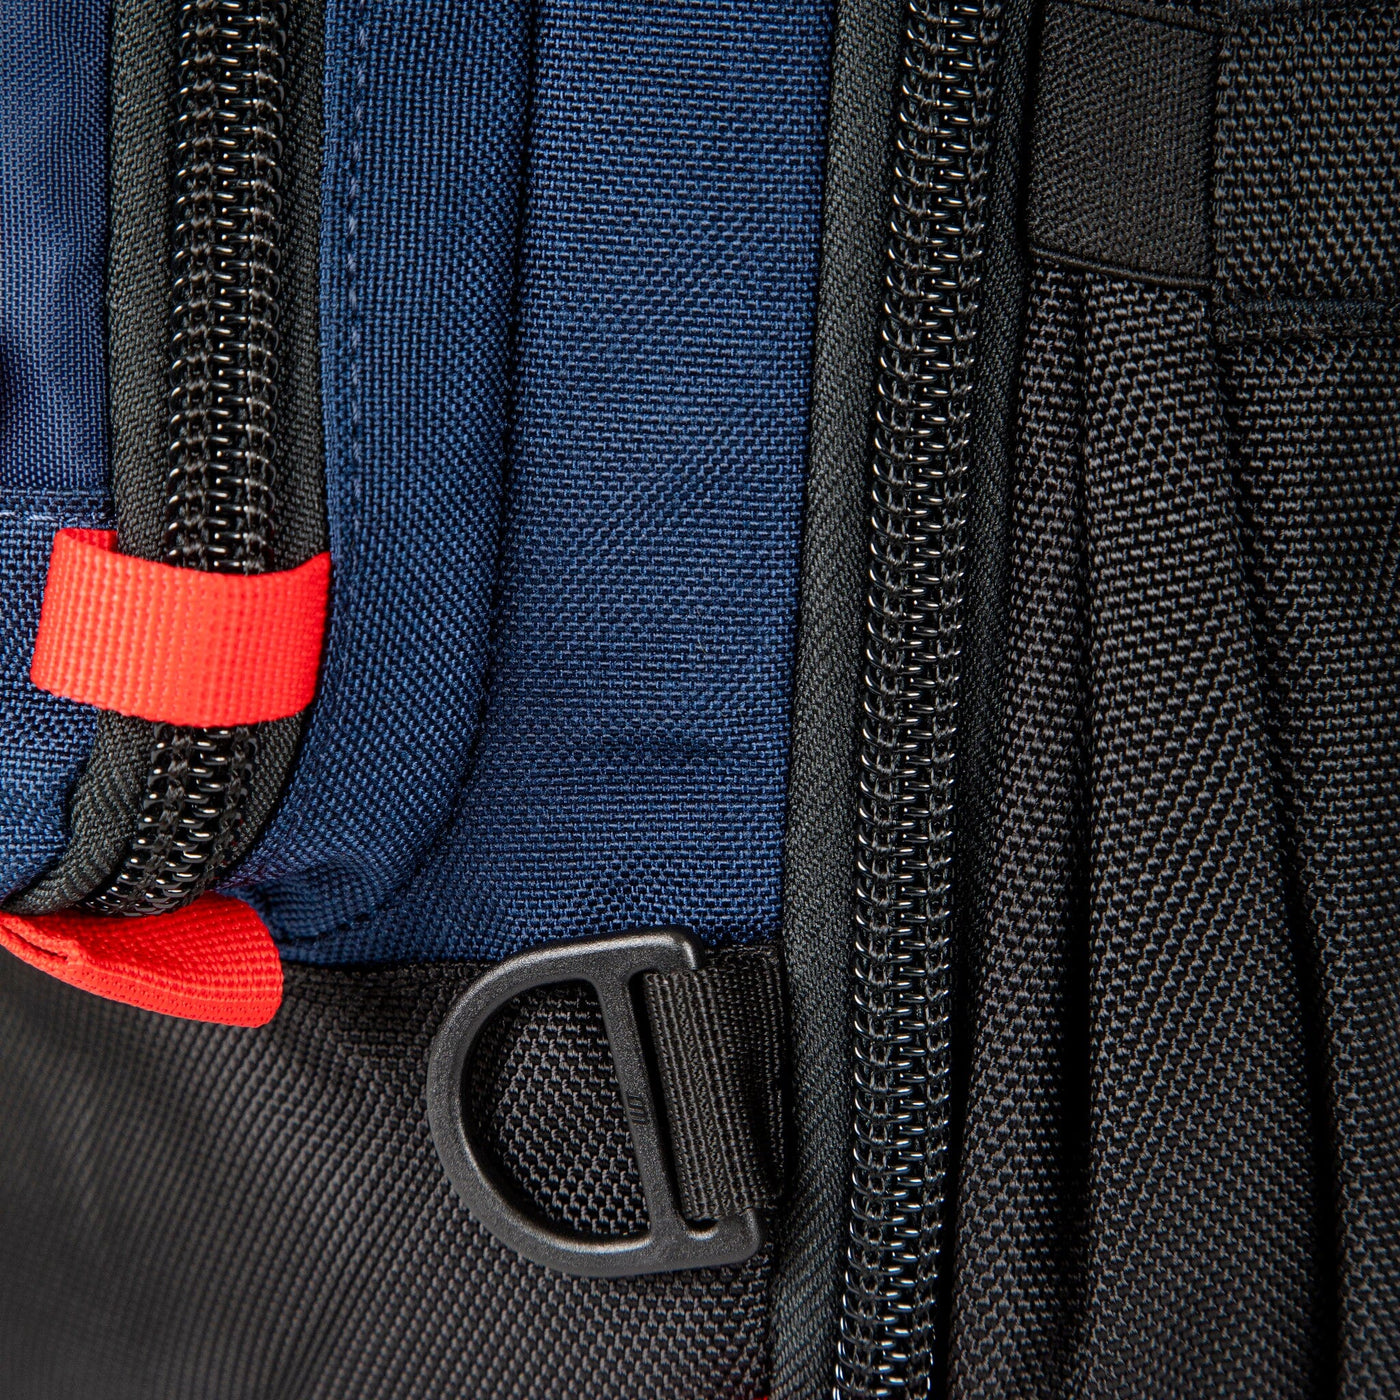 global travel pack close up ykk zippers